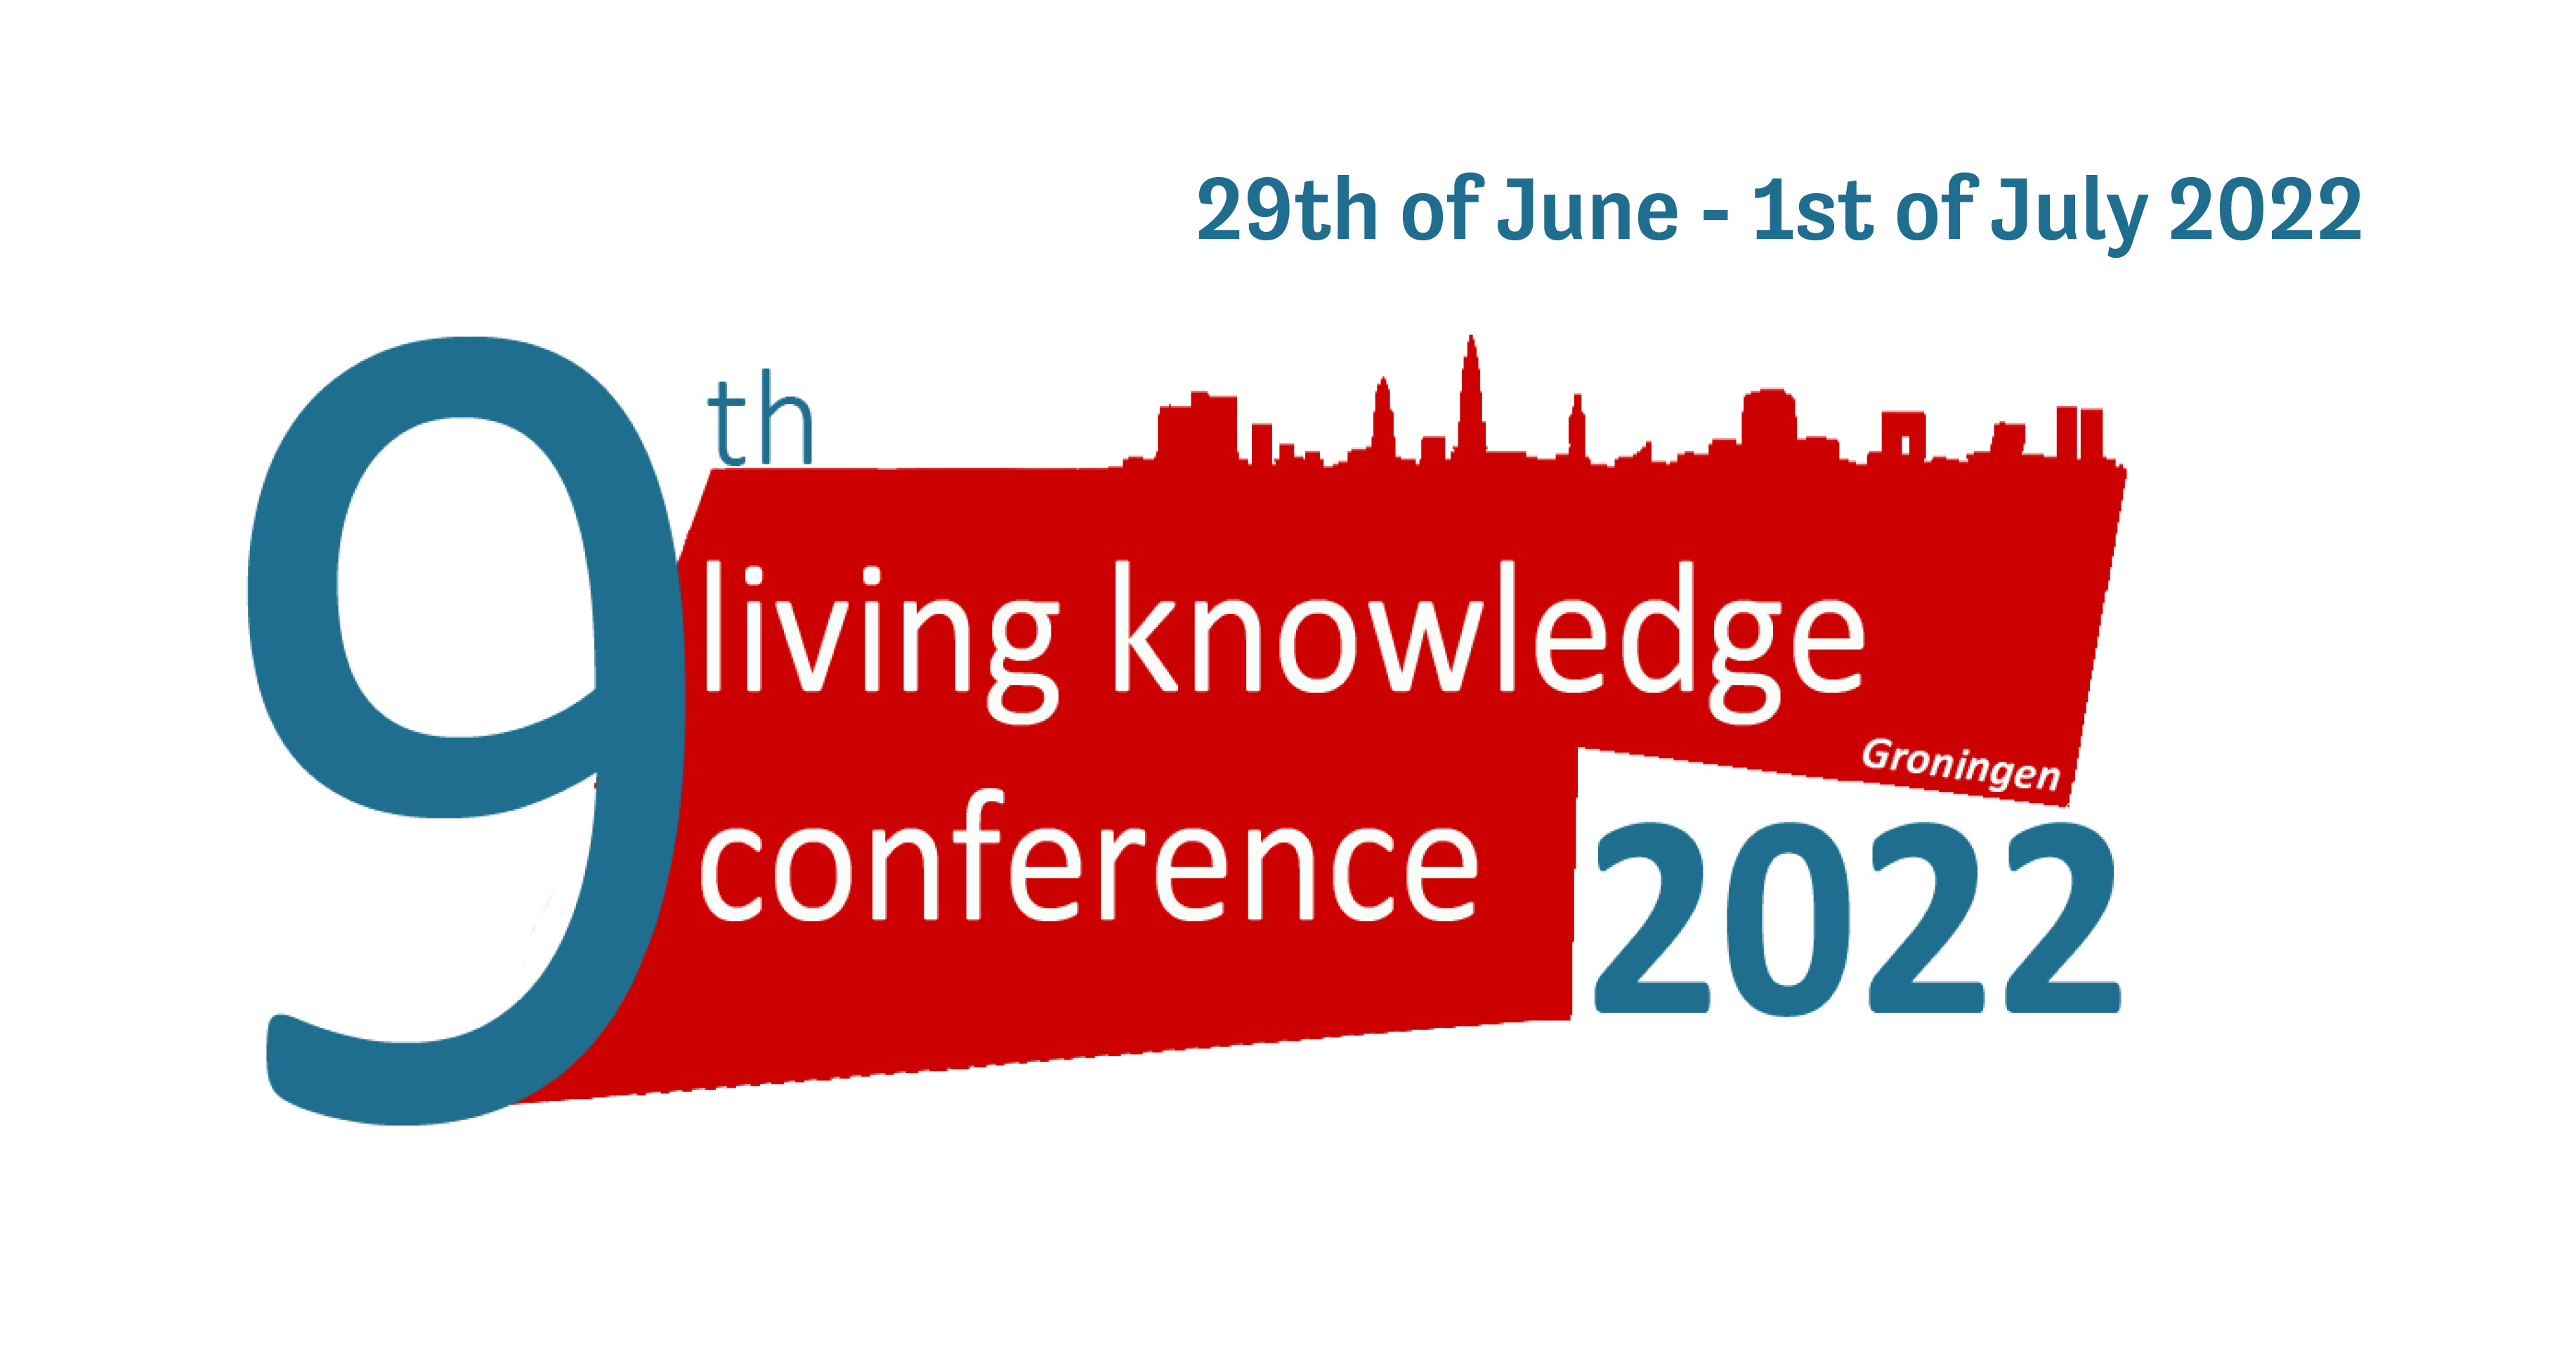 Living Knowledge Conference comes to Groningen